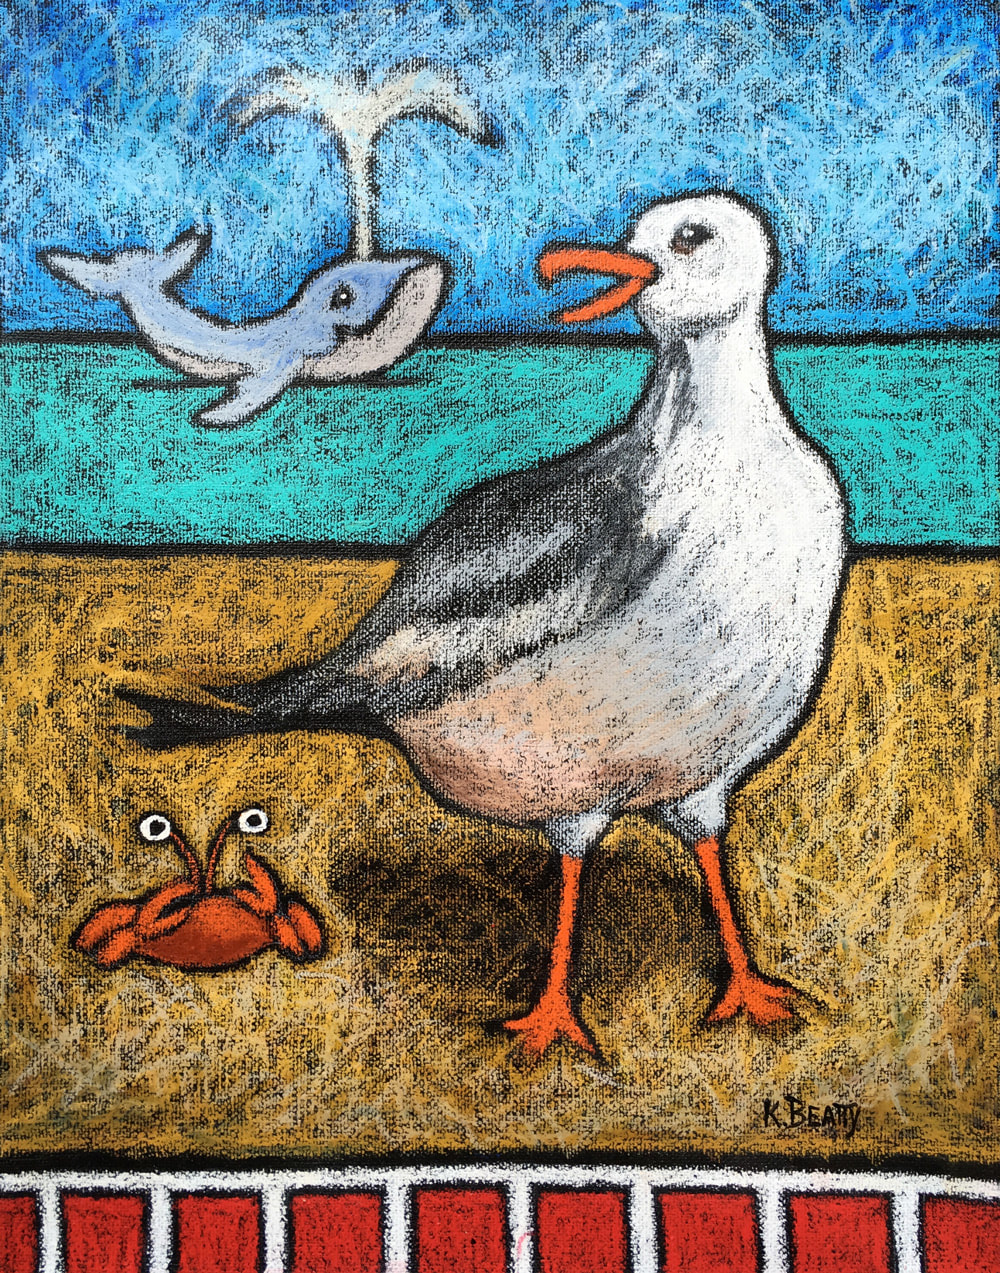 This whimsical scene features a seagull on the beach hanging out with a whale and a crab. Fun and silly summertime fun in a unique loose style.